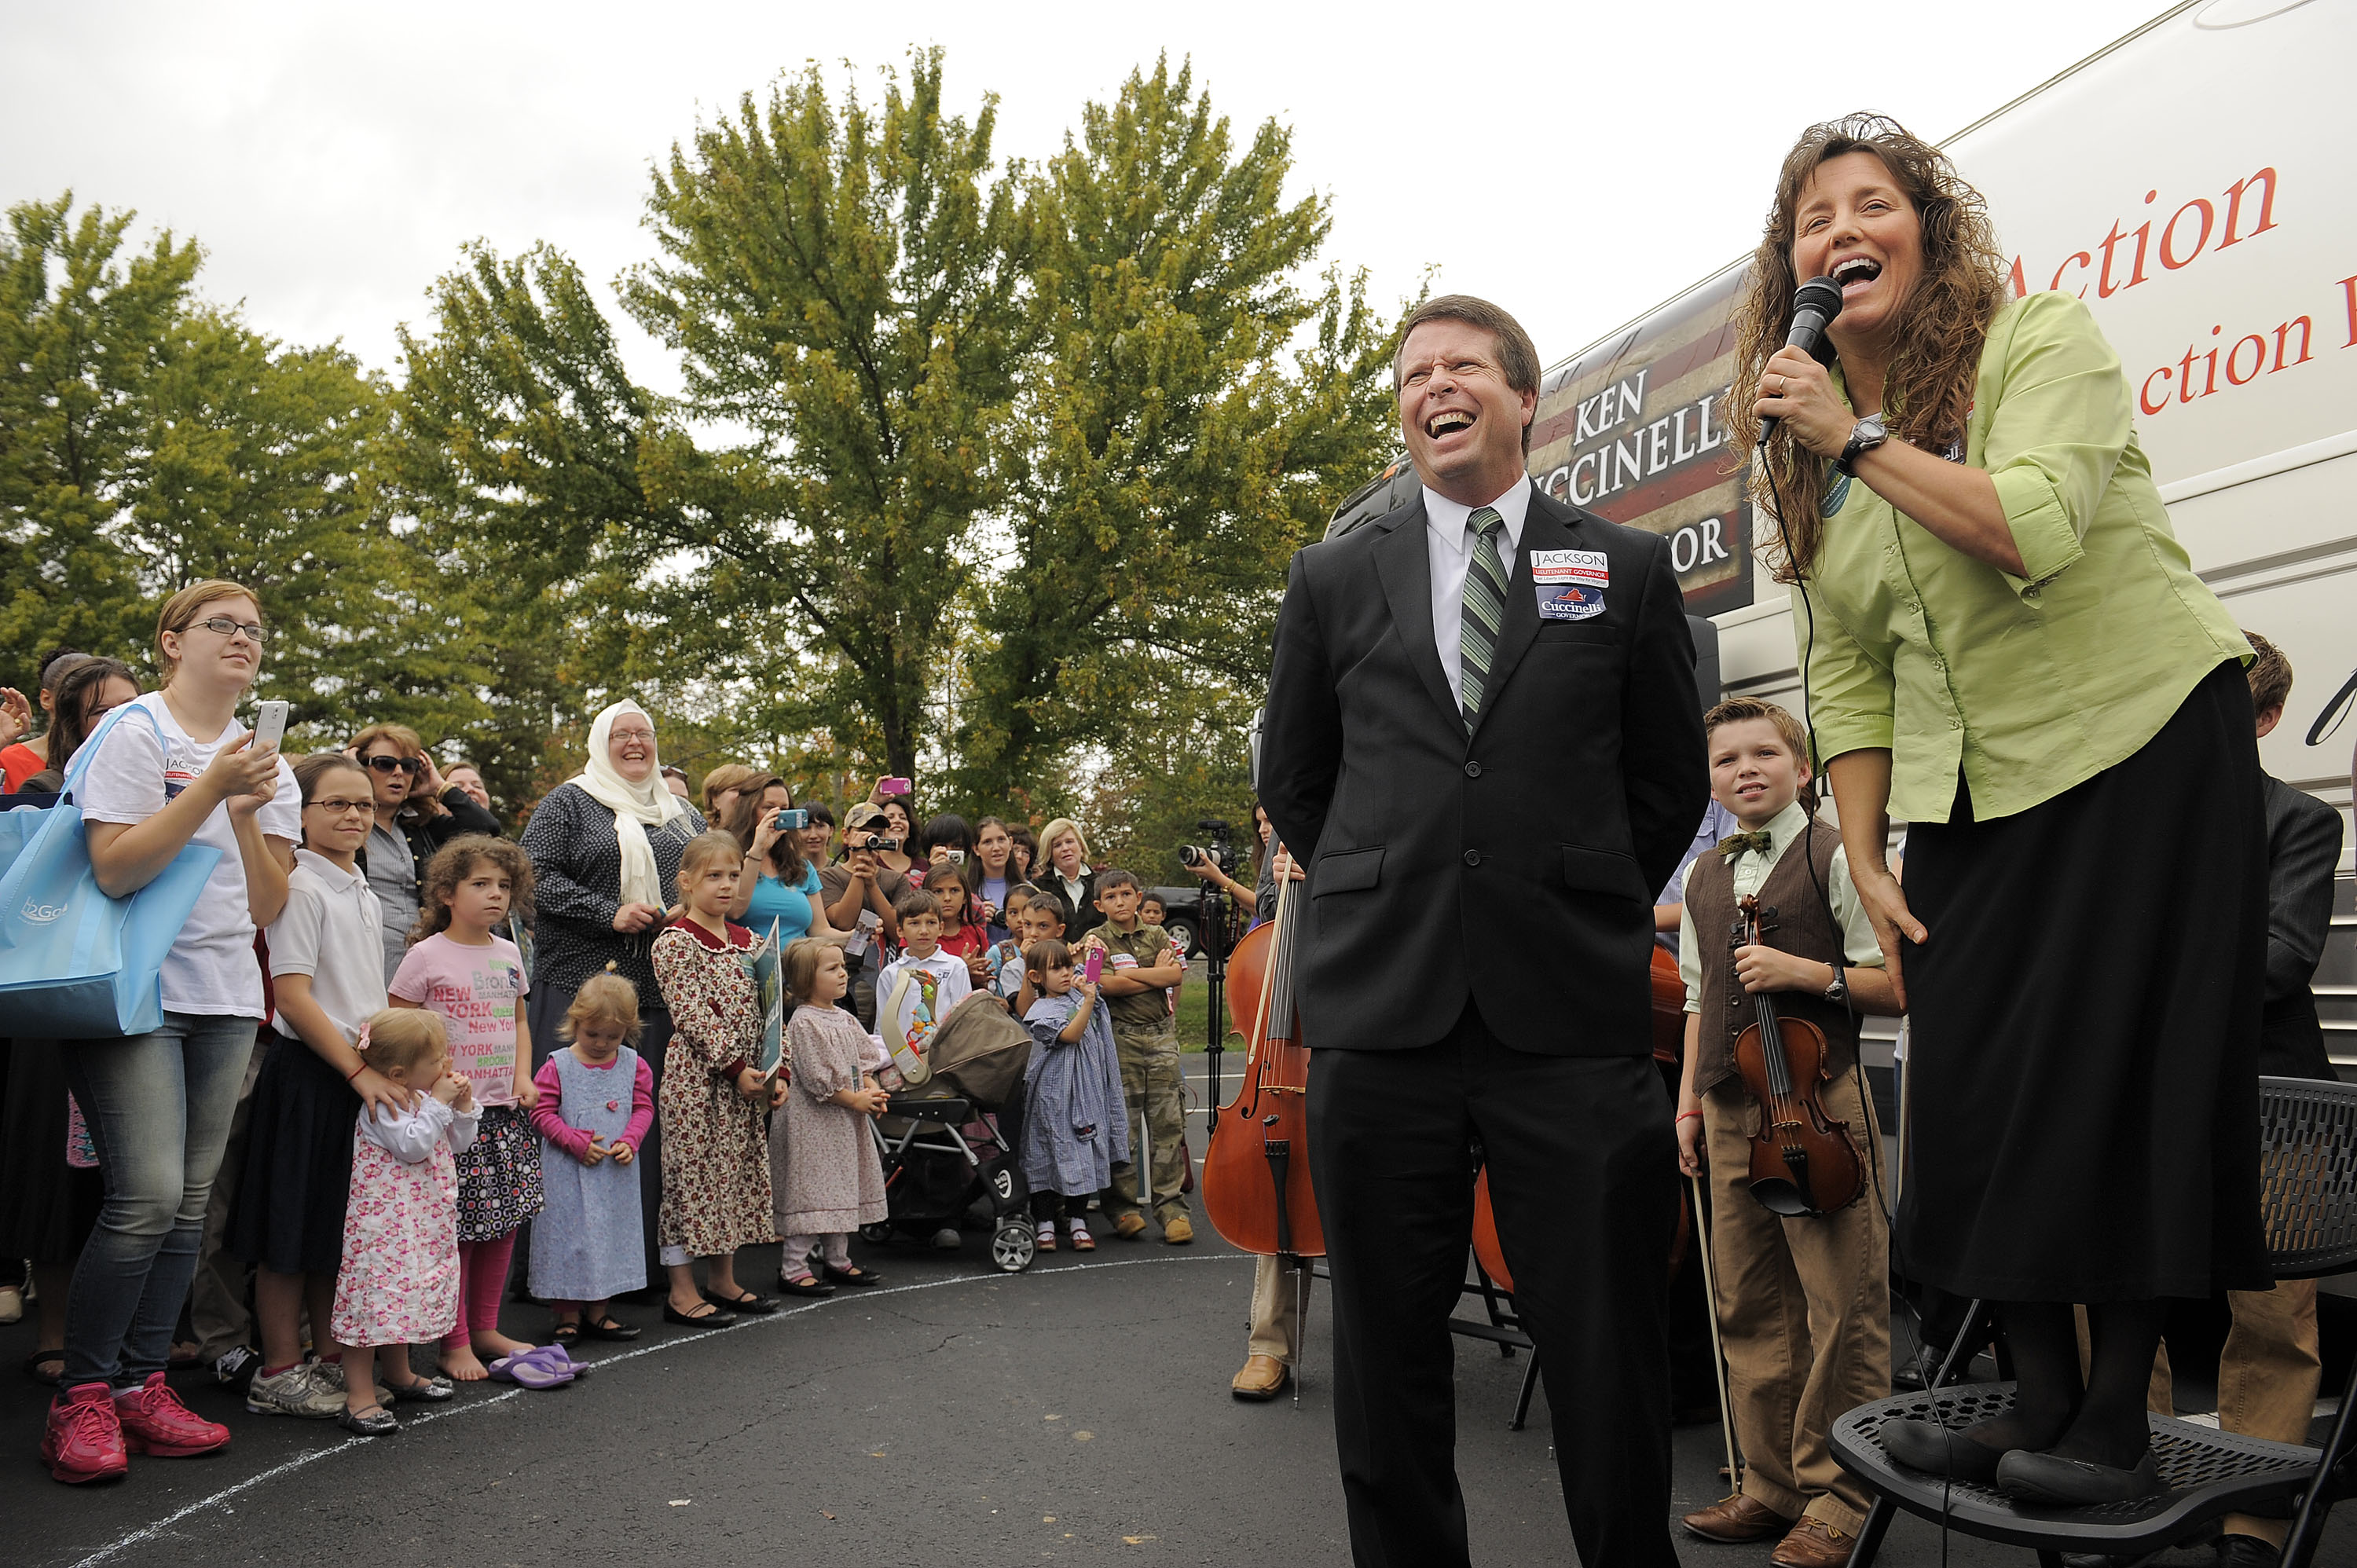 Reality telvision celebrities, Jim Bob Duggar, center, and his wife, Michelle Duggar make a stop on their "Values Bus Tour" outside Heritage Baptist Church on Wednesday October 16, 2013 in Woodbridge, VA. (The Washington Post&mdash;The Washington Post/Getty Images)